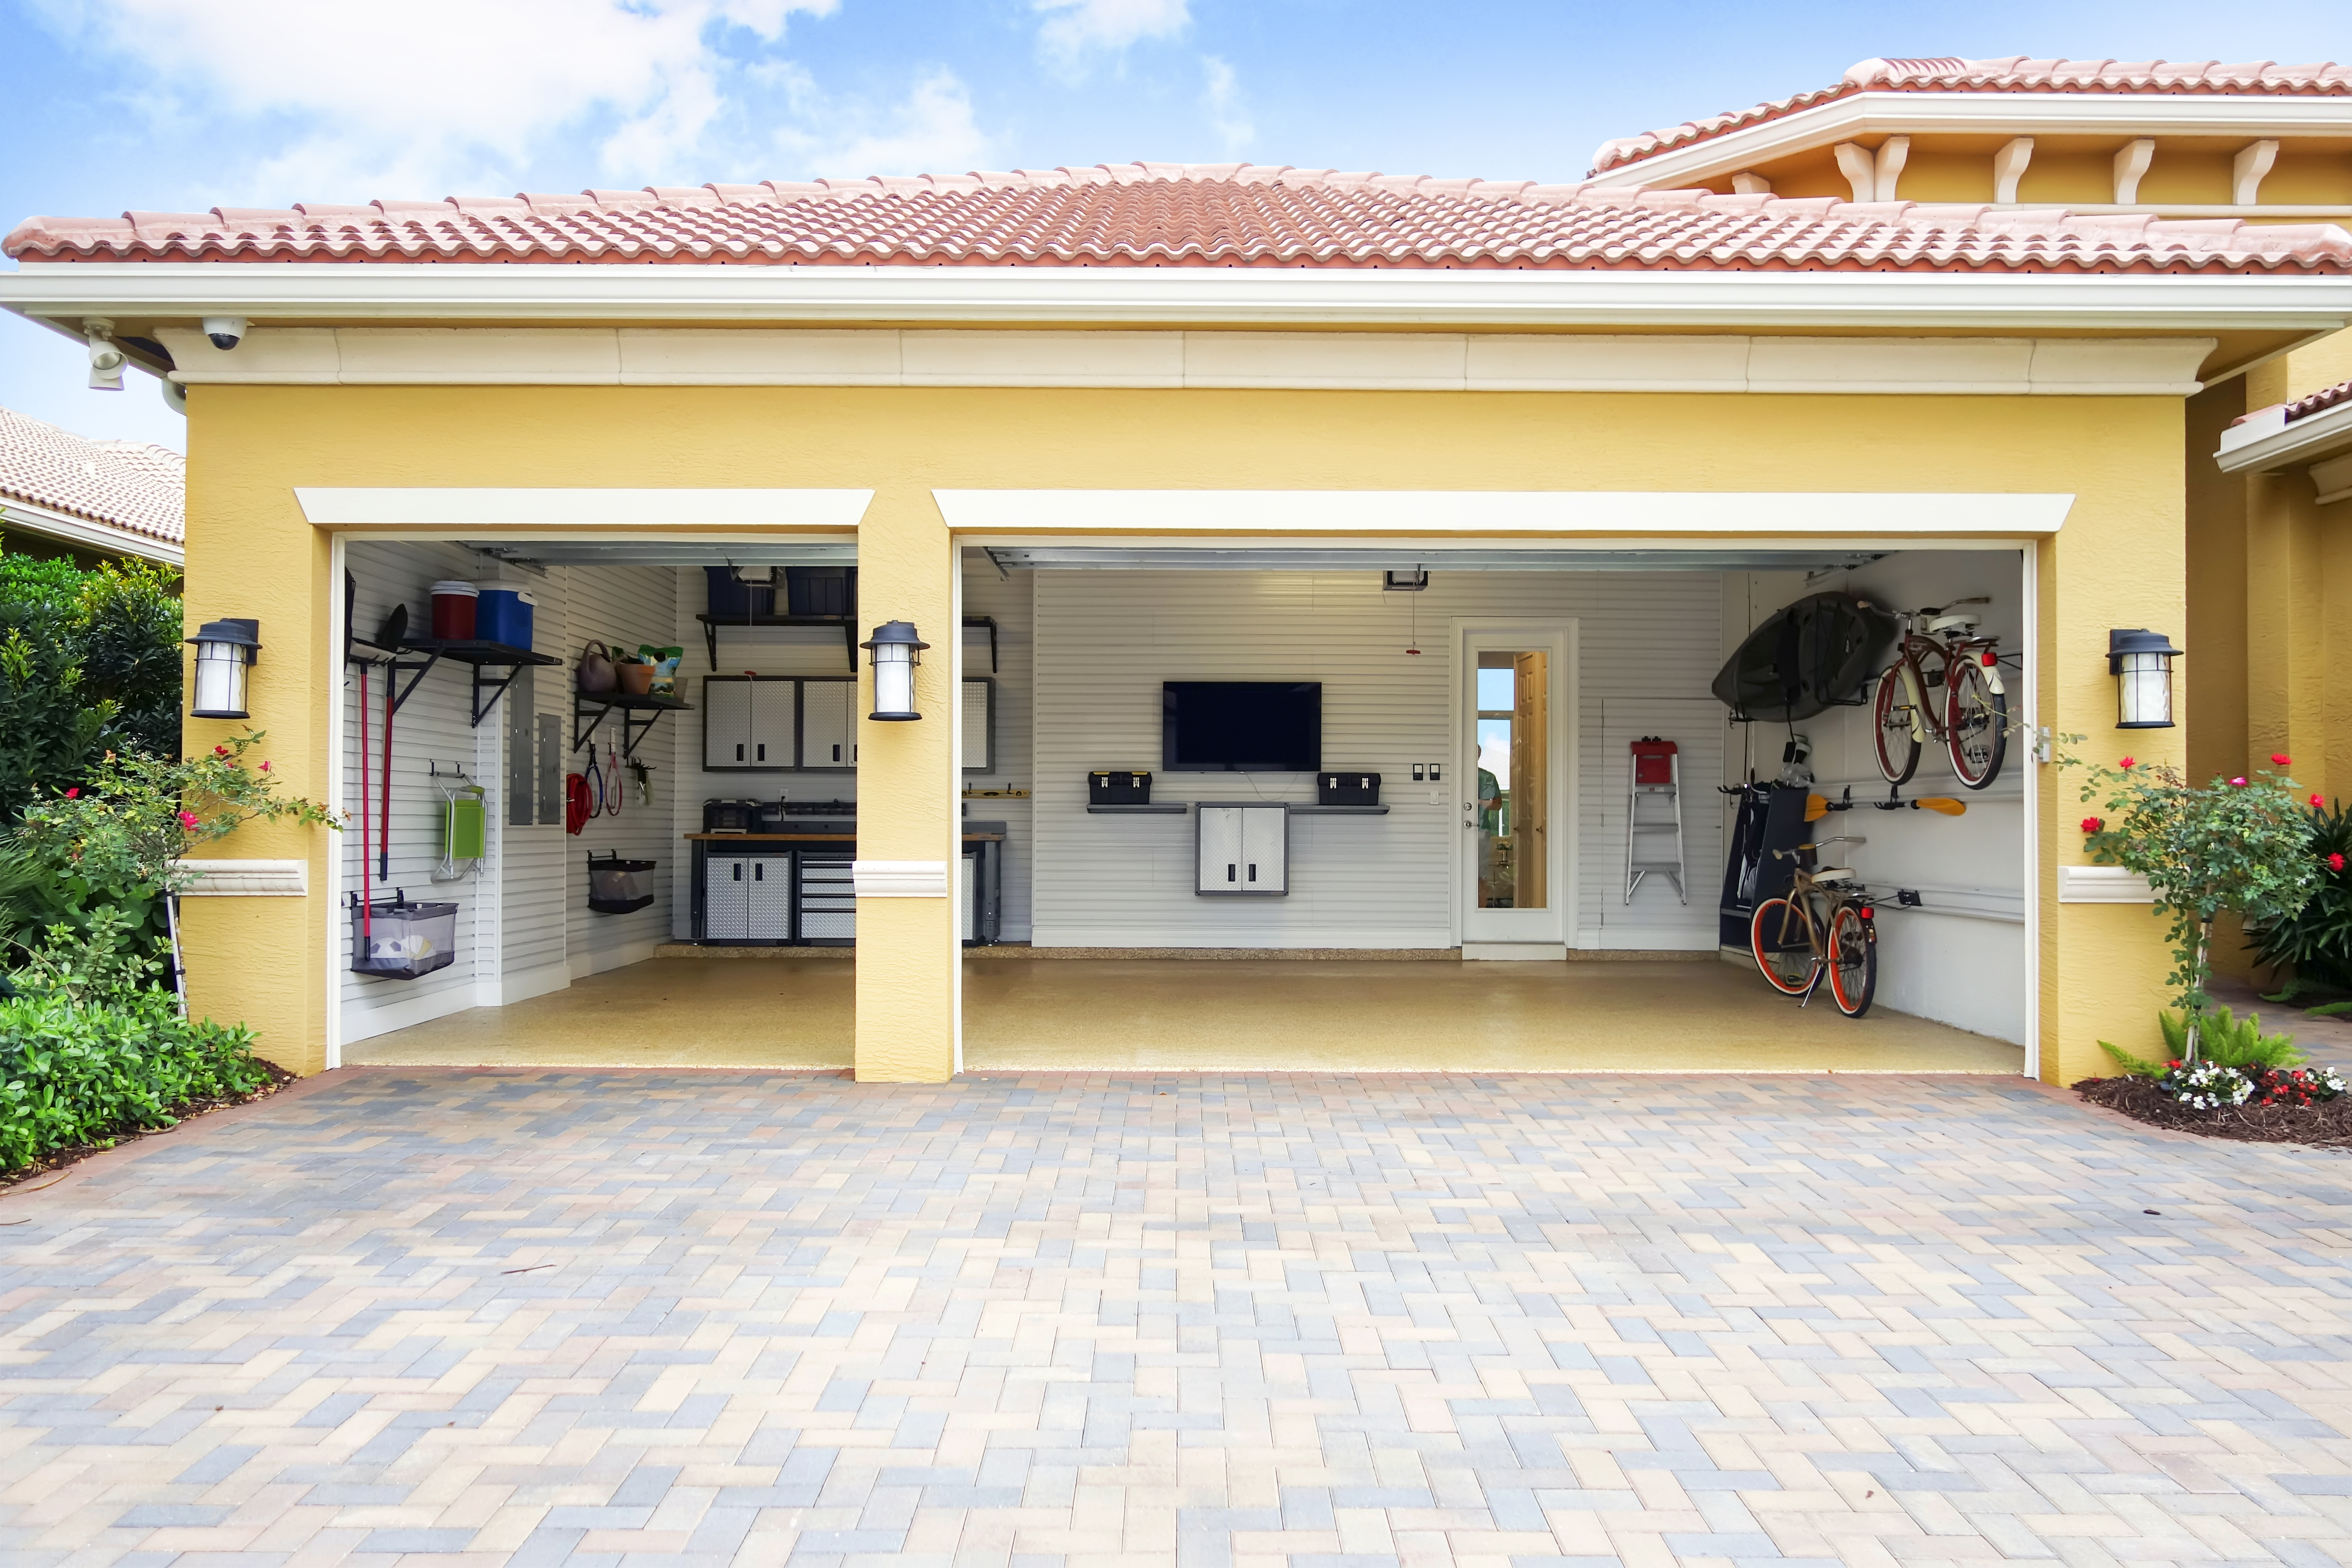 12 garage organization ideas to help you overcome the clutter